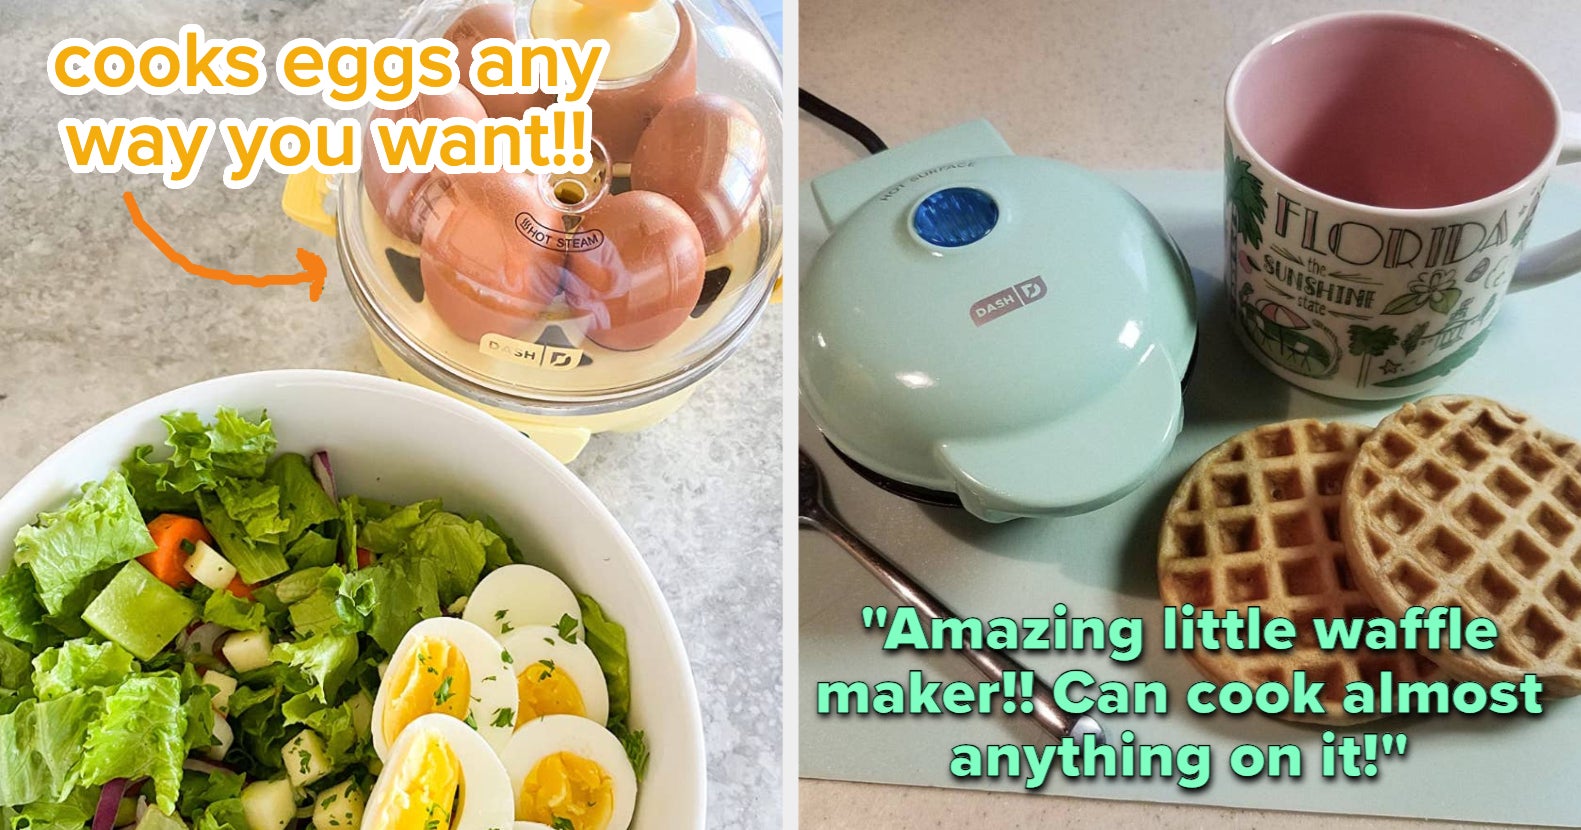 10 Surprisingly Unusual Cooking Themed Gifts for the Home Chef - Homebody  Eats